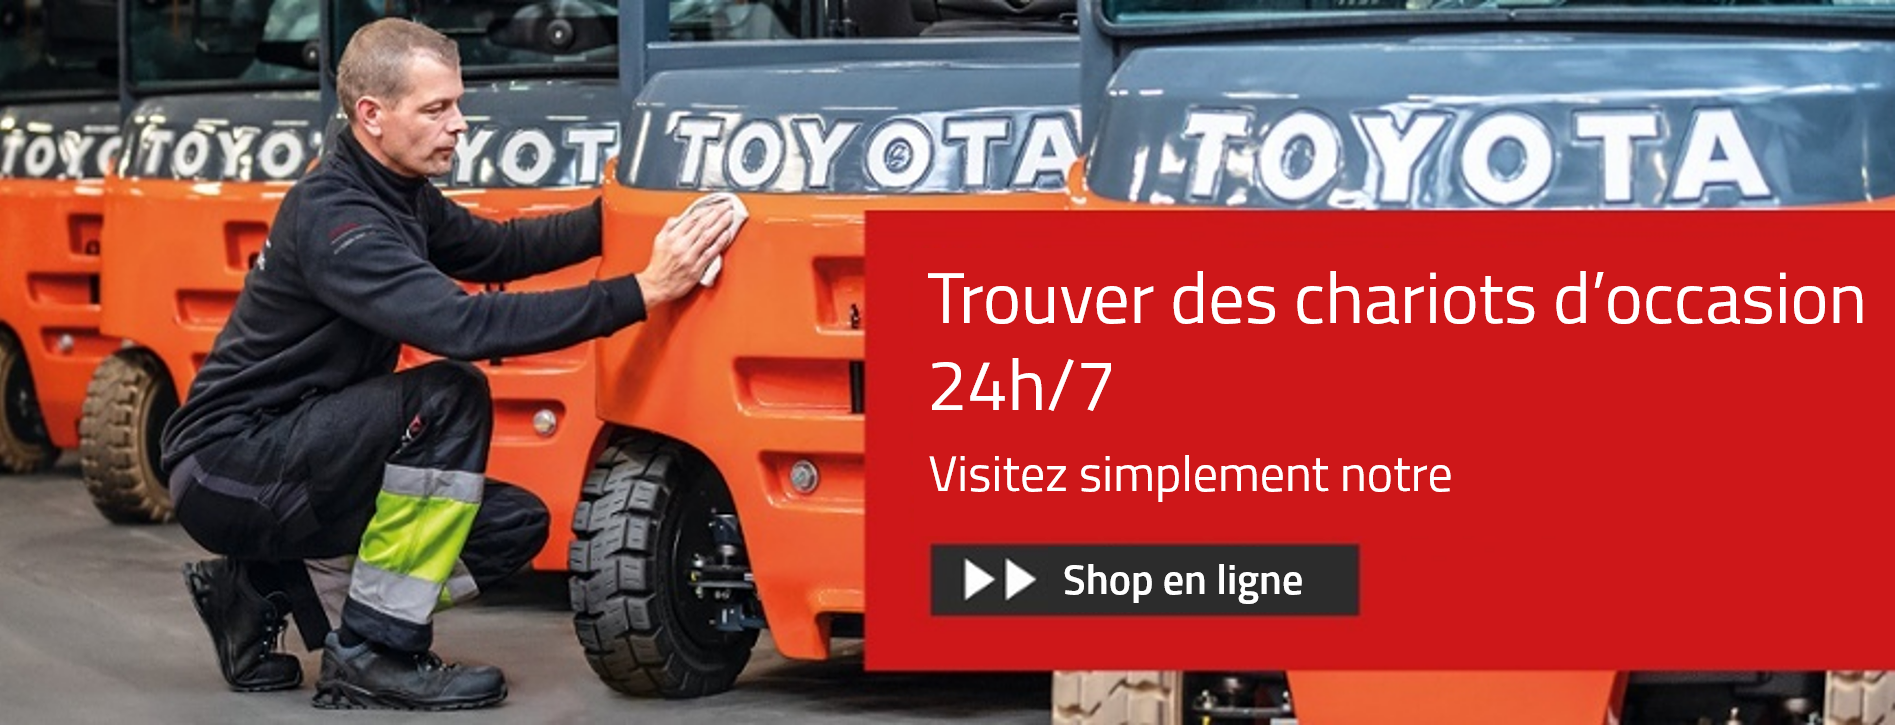 toyota material handling_acheter des chariots doccasion_image4